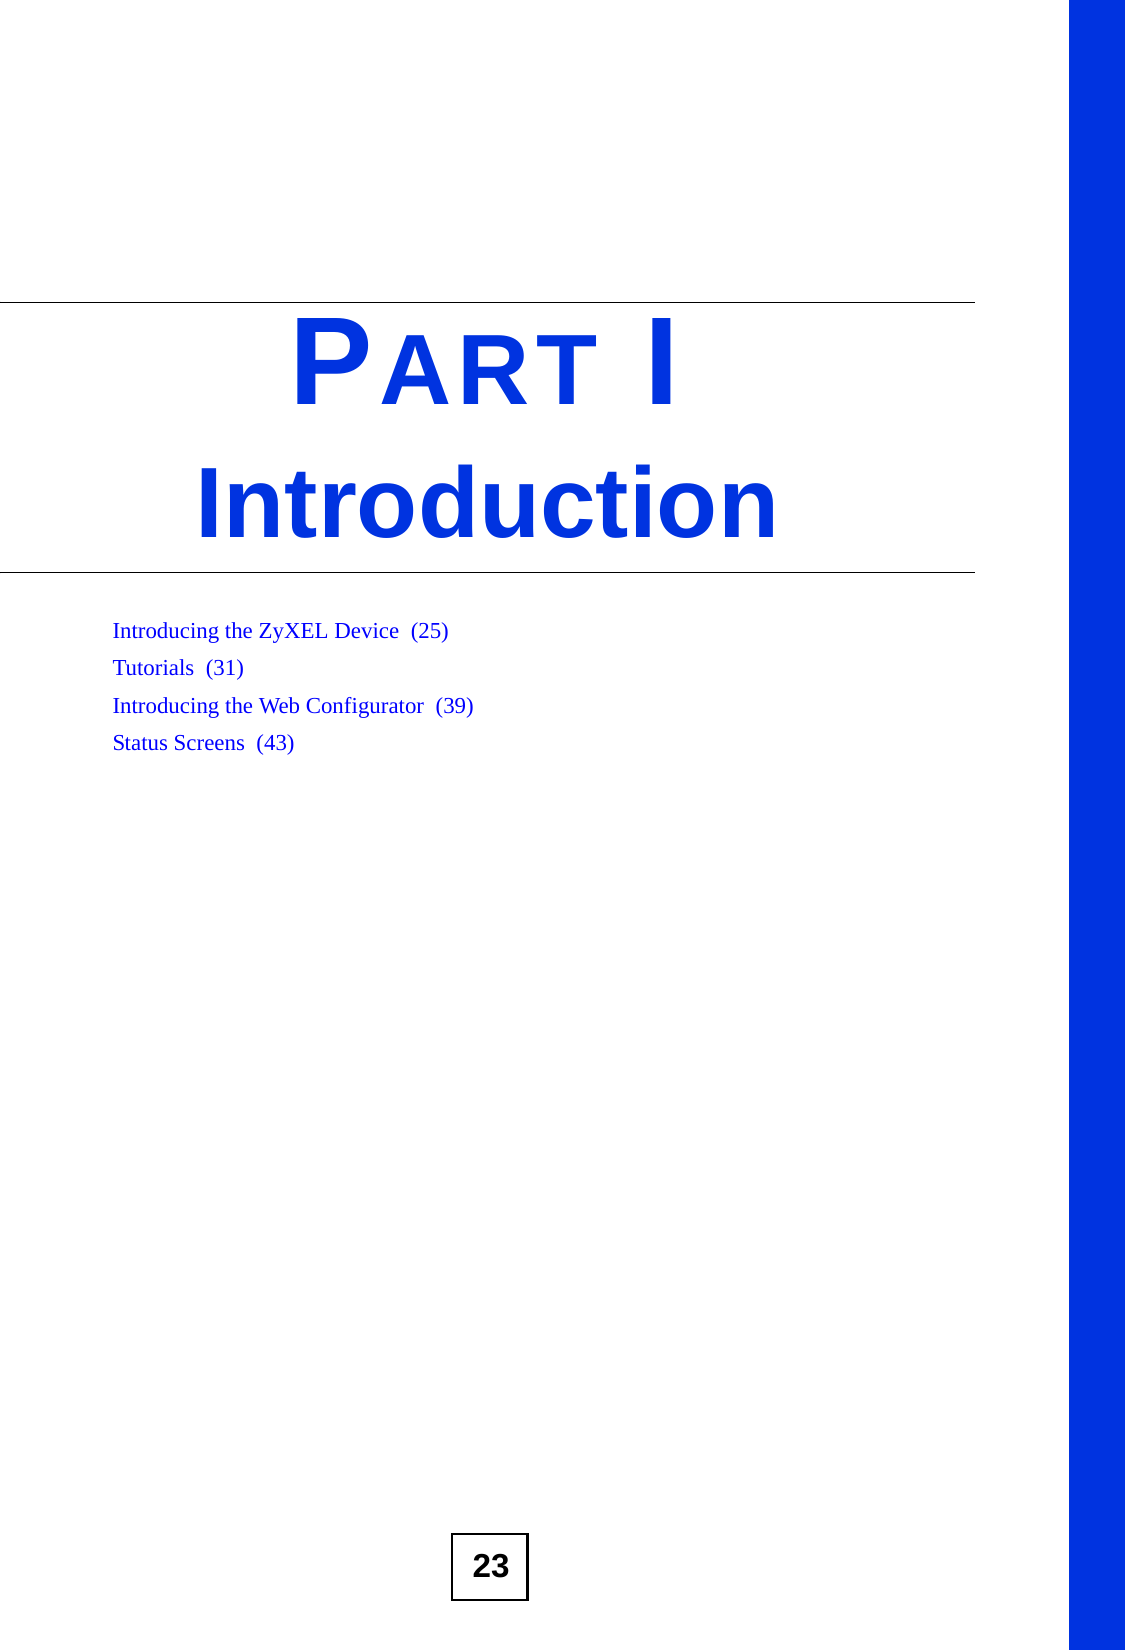 23PART IIntroductionIntroducing the ZyXEL Device  (25)Tutorials  (31)Introducing the Web Configurator  (39)Status Screens  (43)